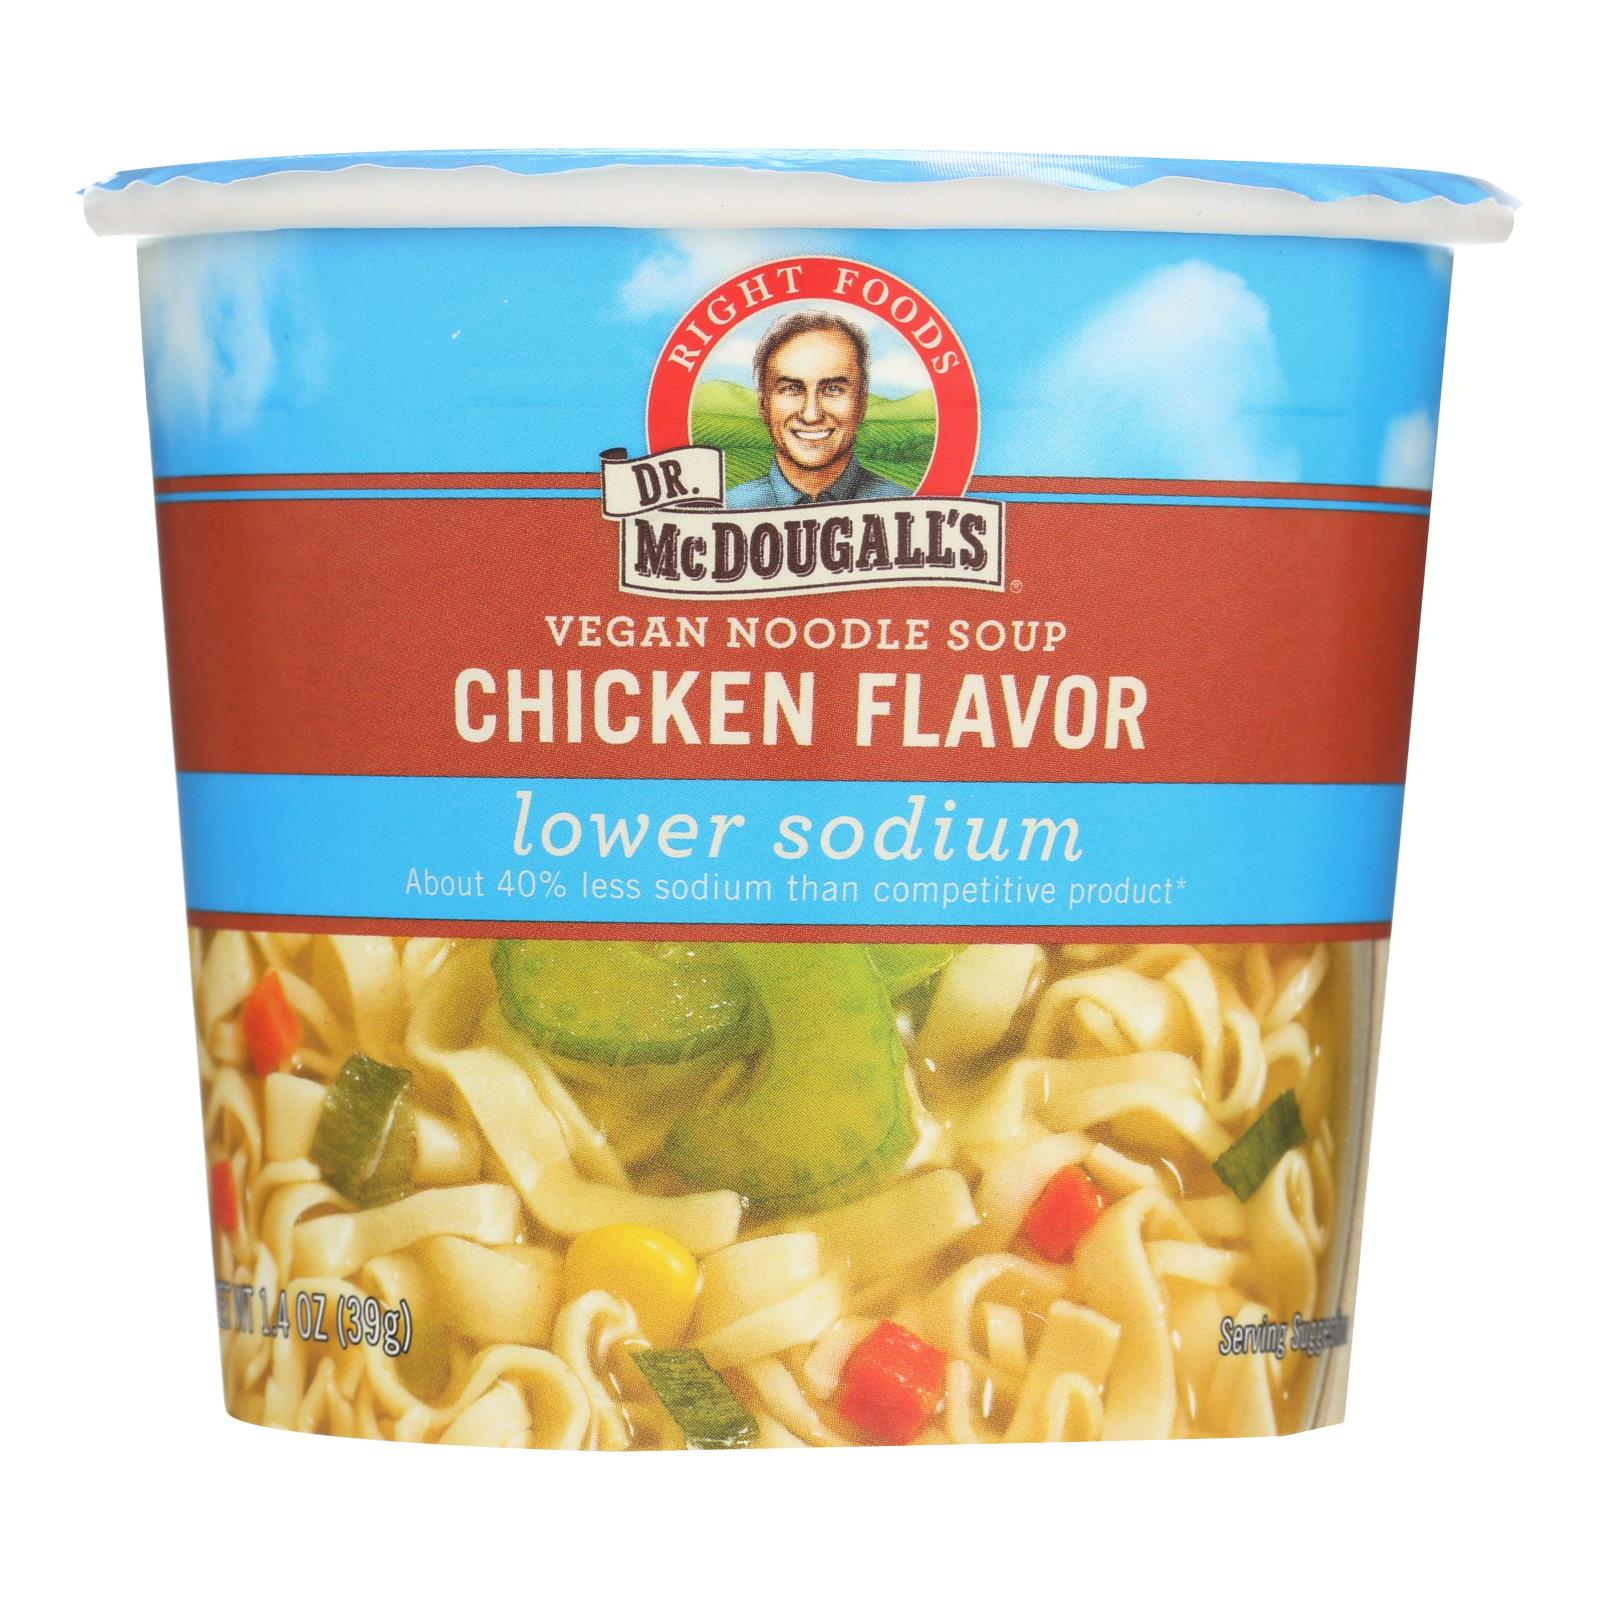 Dr. Mcdougall's Vegan Noodle Lower Sodium Soup Cup - Chicken - Case Of 6 - 1.4 Oz. - Whole Green Foods